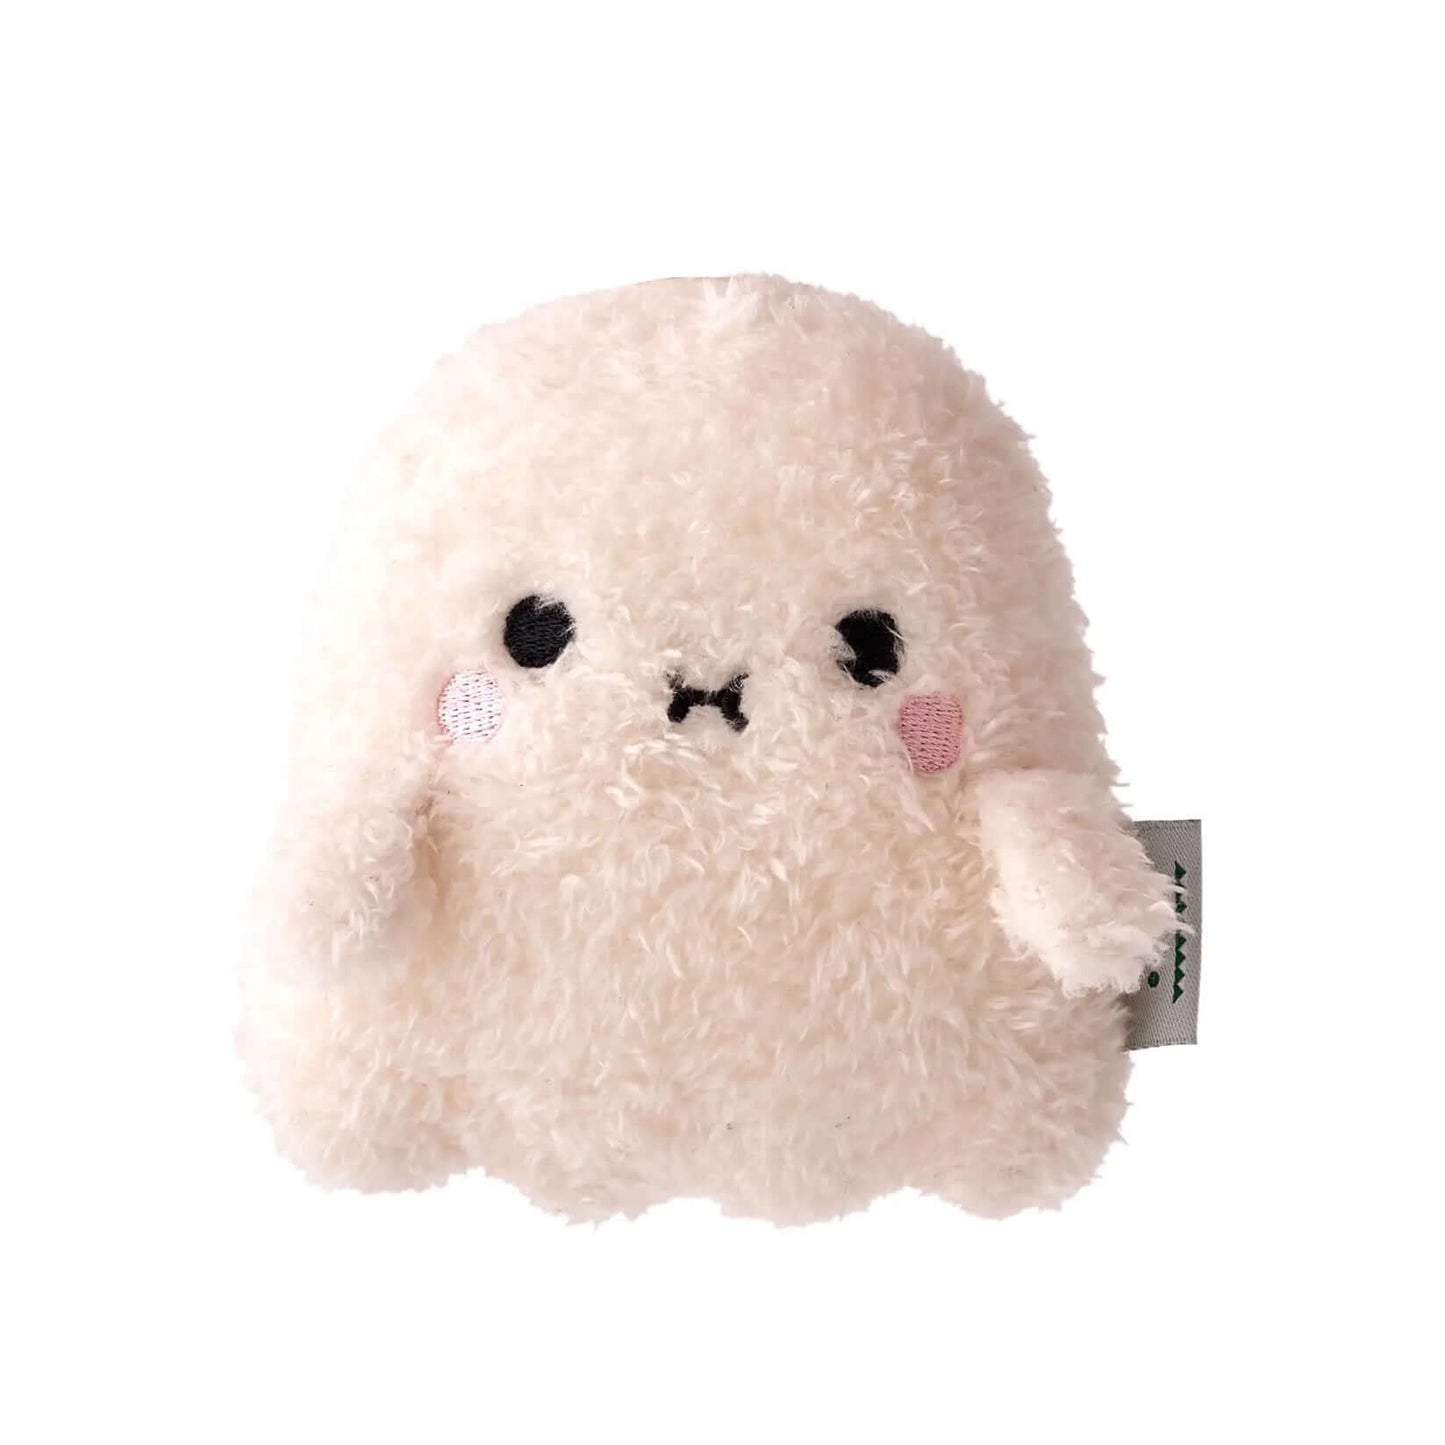 Noodoll Mini Plush Toy - Riceboo the Ghost